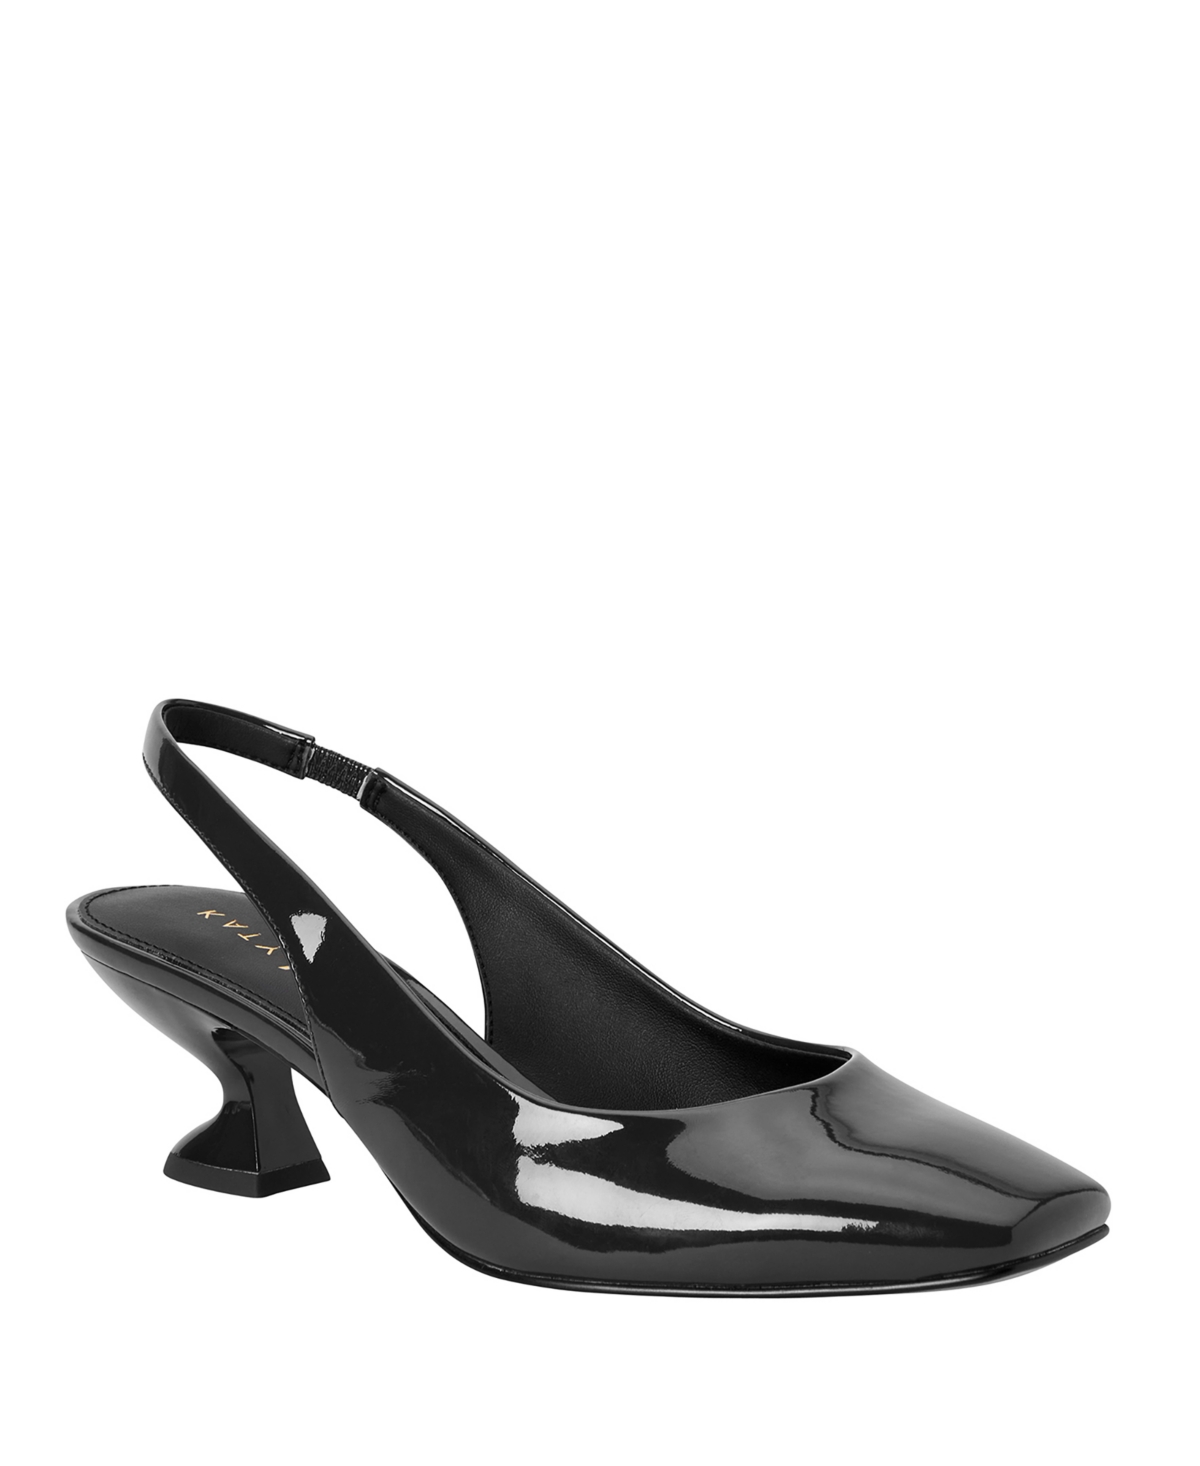 KATY PERRY WOMEN'S THE LATERR SLIP-ON SLING BACK PUMPS